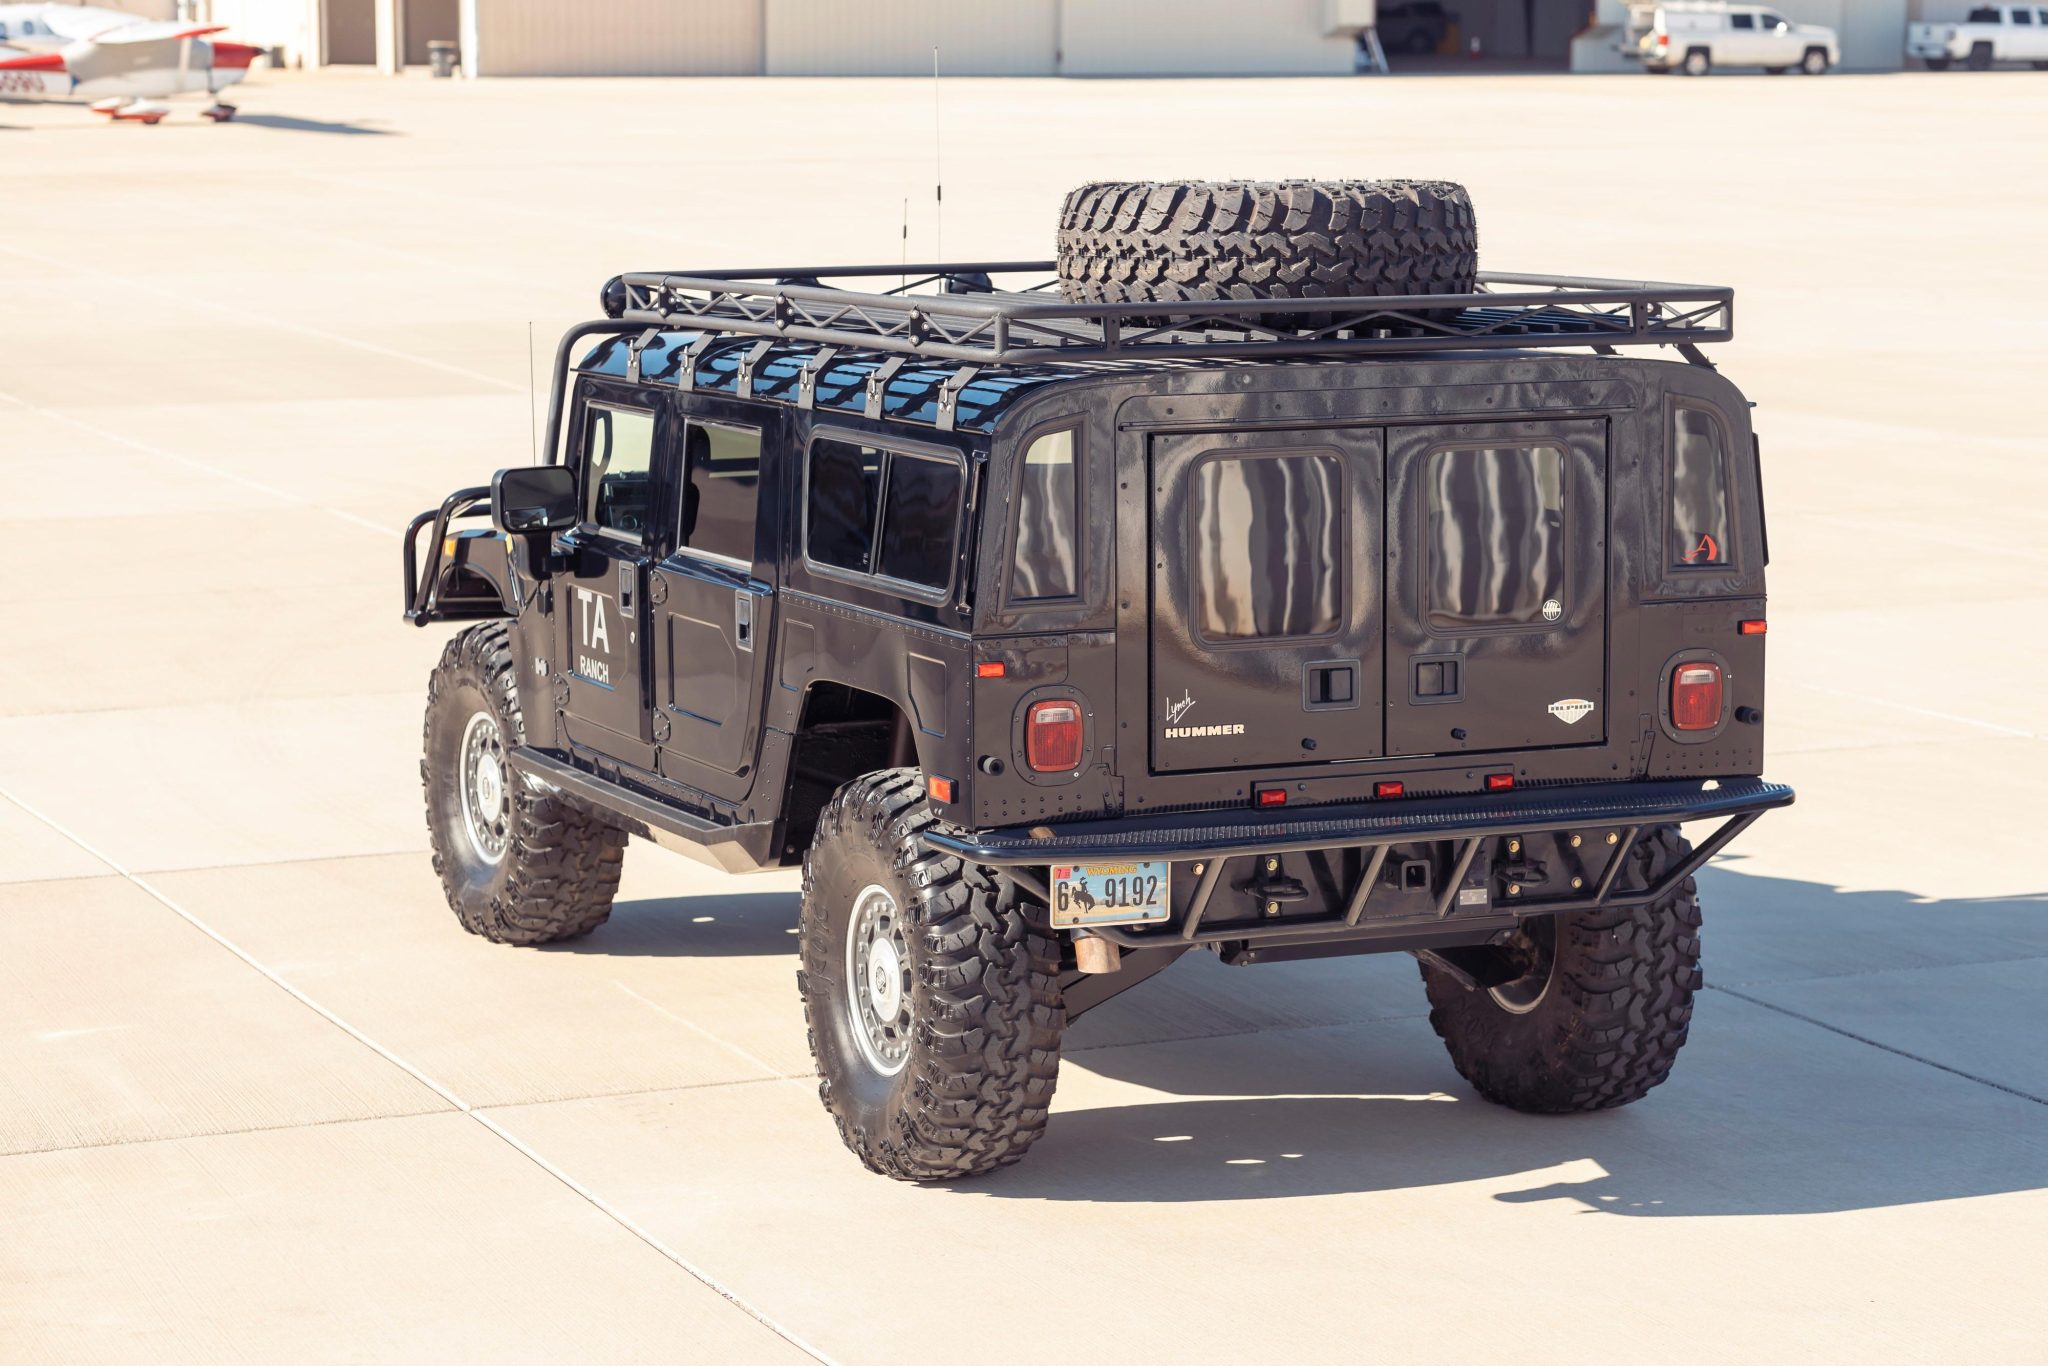 2006 Hummer H1 Alpha Is One Cool Off-Road Rig - autoevolution